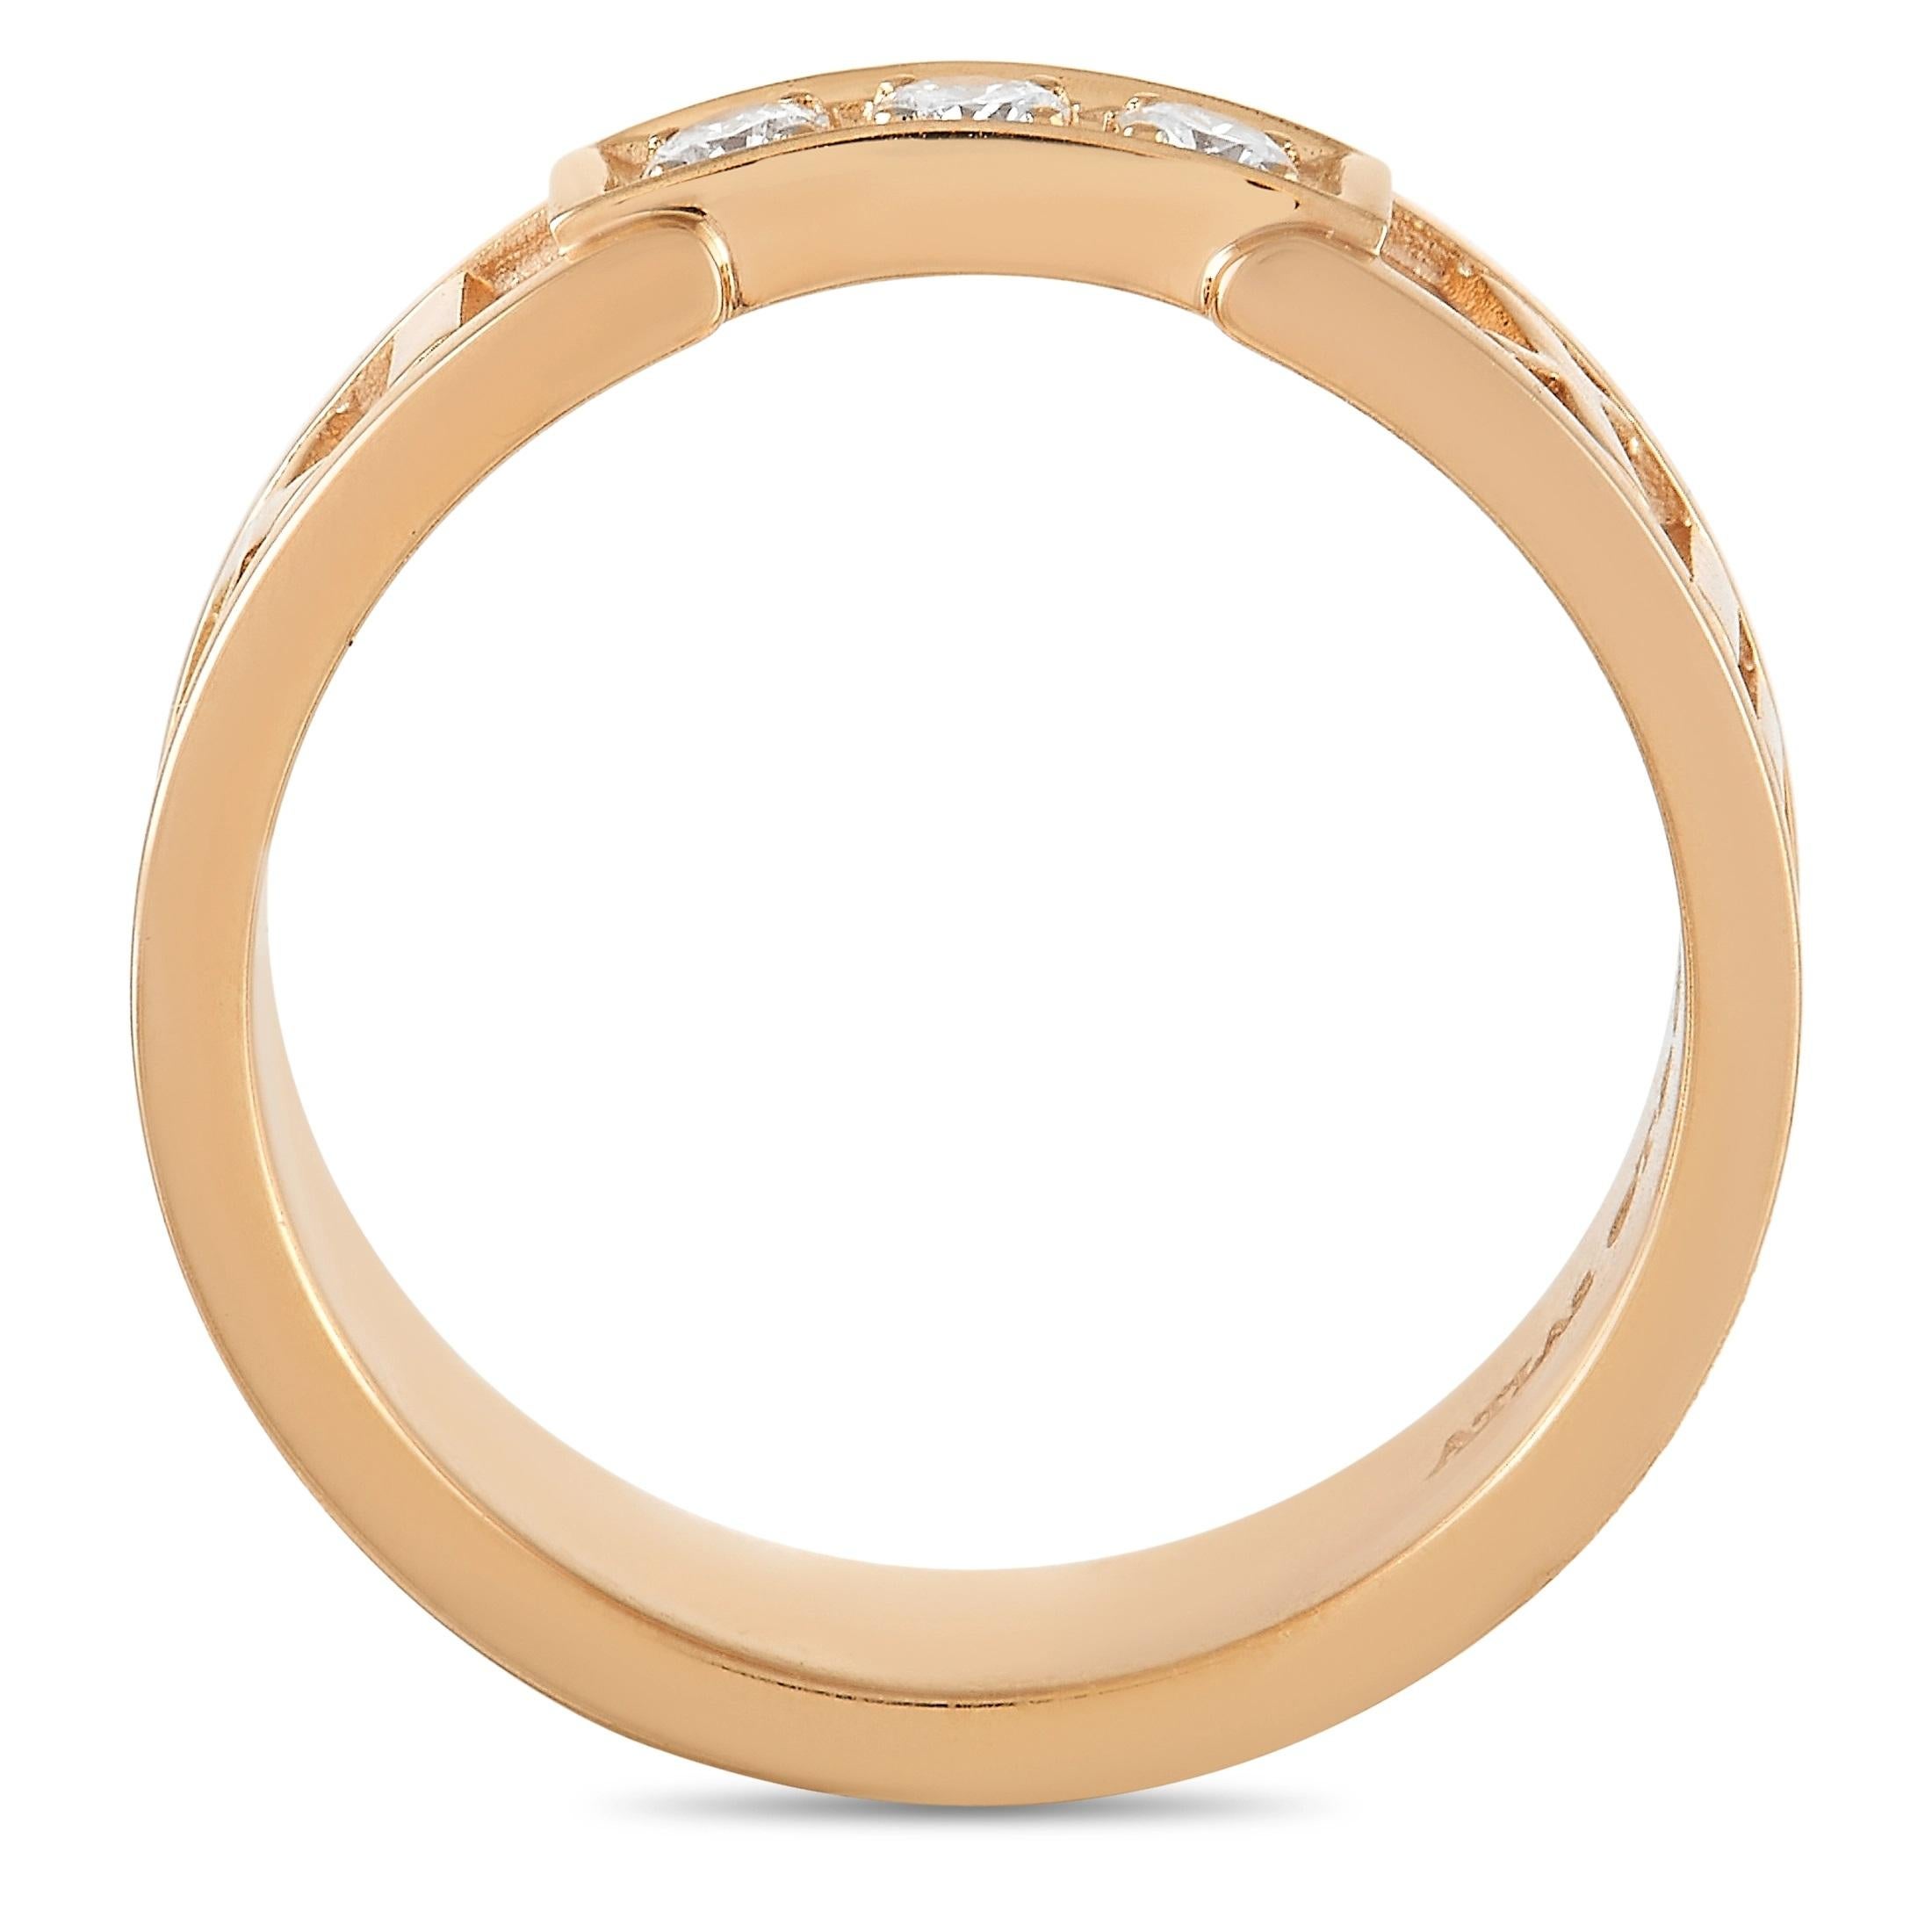 A trio of diamonds totaling 0.20 carats make a statement at the center of this elegant, understated ring from Tiffany & Co. Crafted from 18K Rose Gold, a 5mm band width and a 2mm top height makes it ideal for everyday wear. 
 
 This jewelry piece is